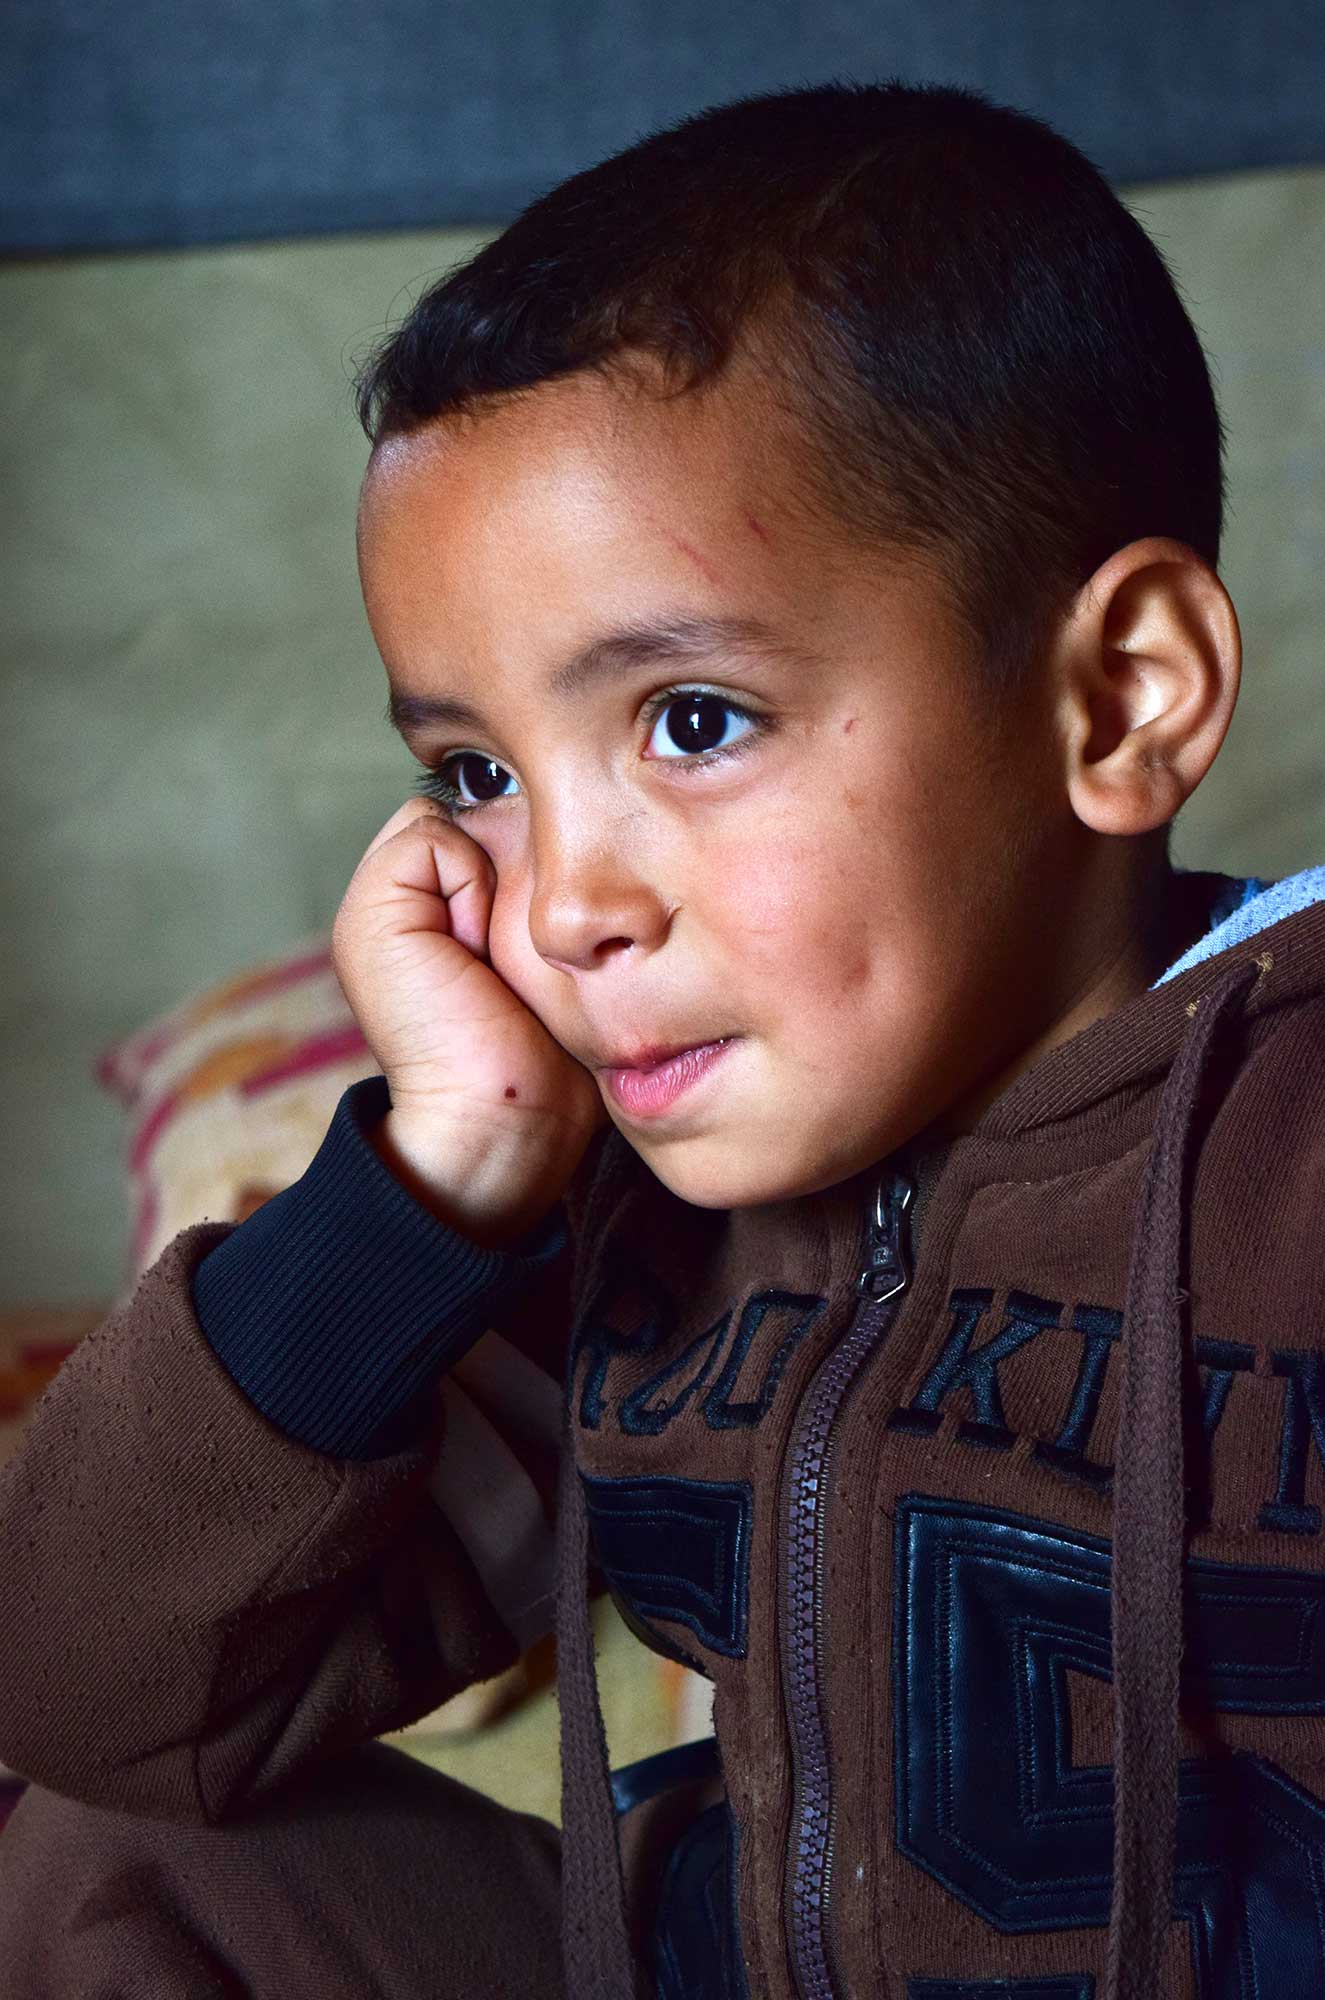 Mohammad has lived his entire life in a de facto refugee camp in Akkar, Lebanon.